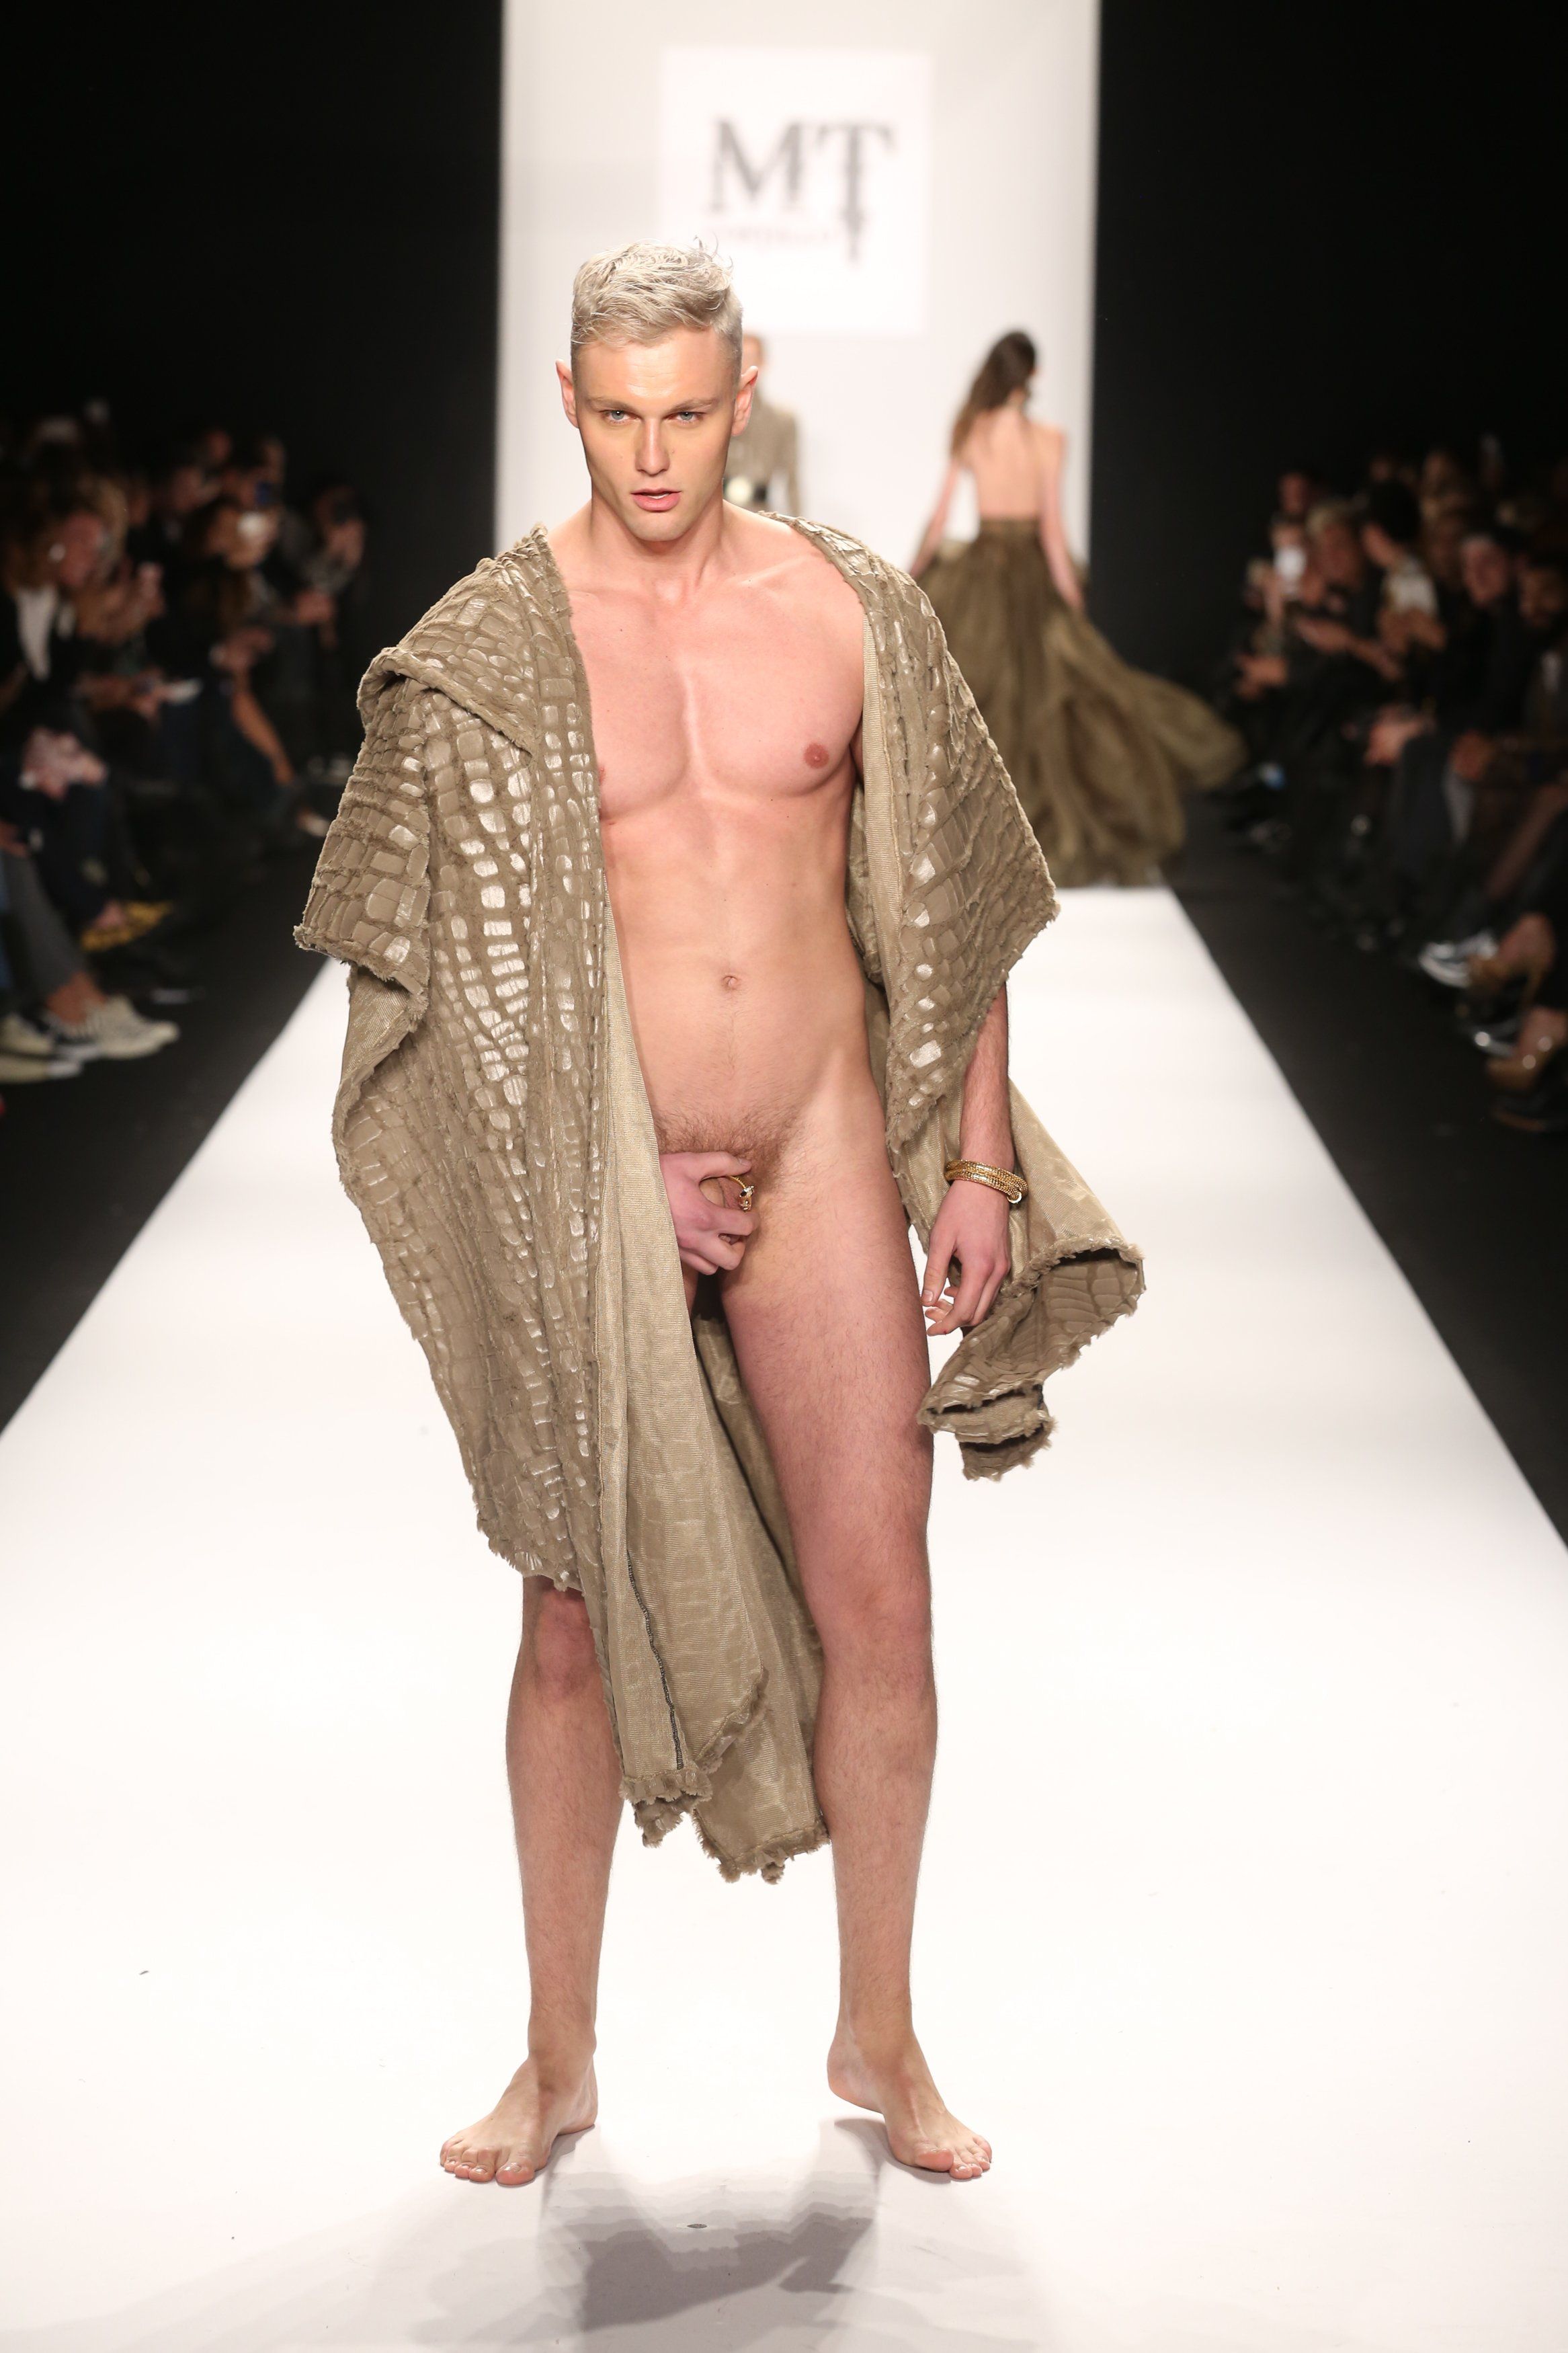 Naked fashion show models catwalk 100% Comments: 3